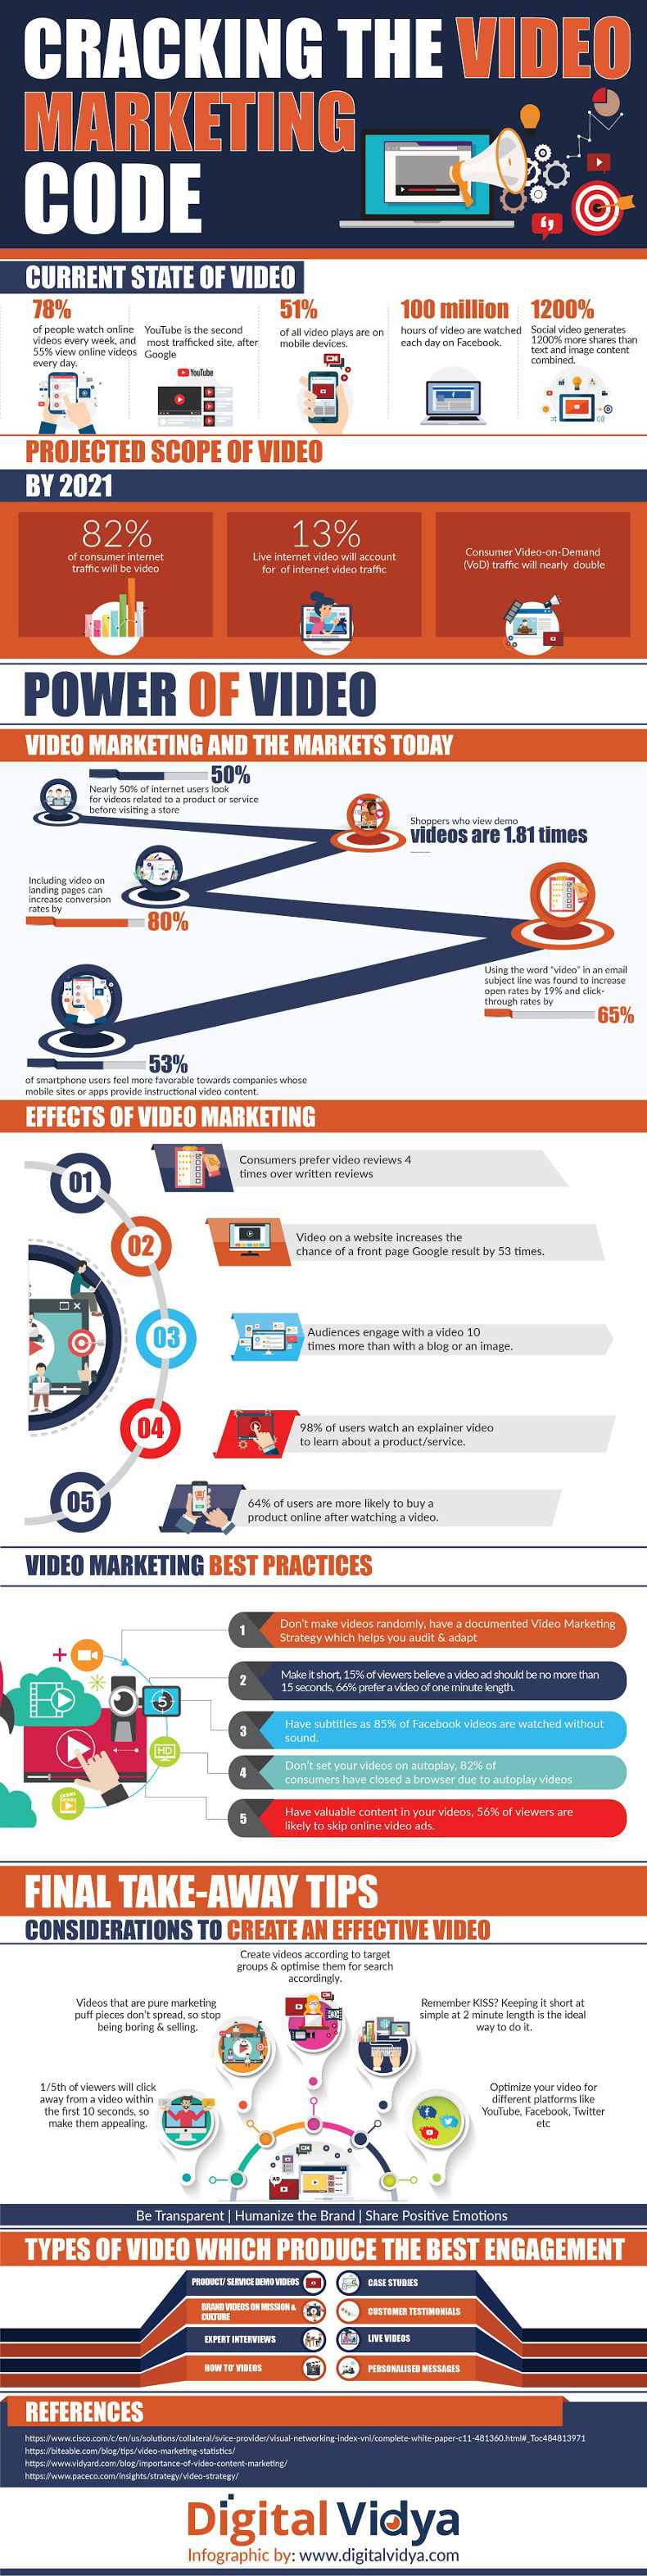 READ TODAY: Cracking the Video Marketing Code [Infographic]